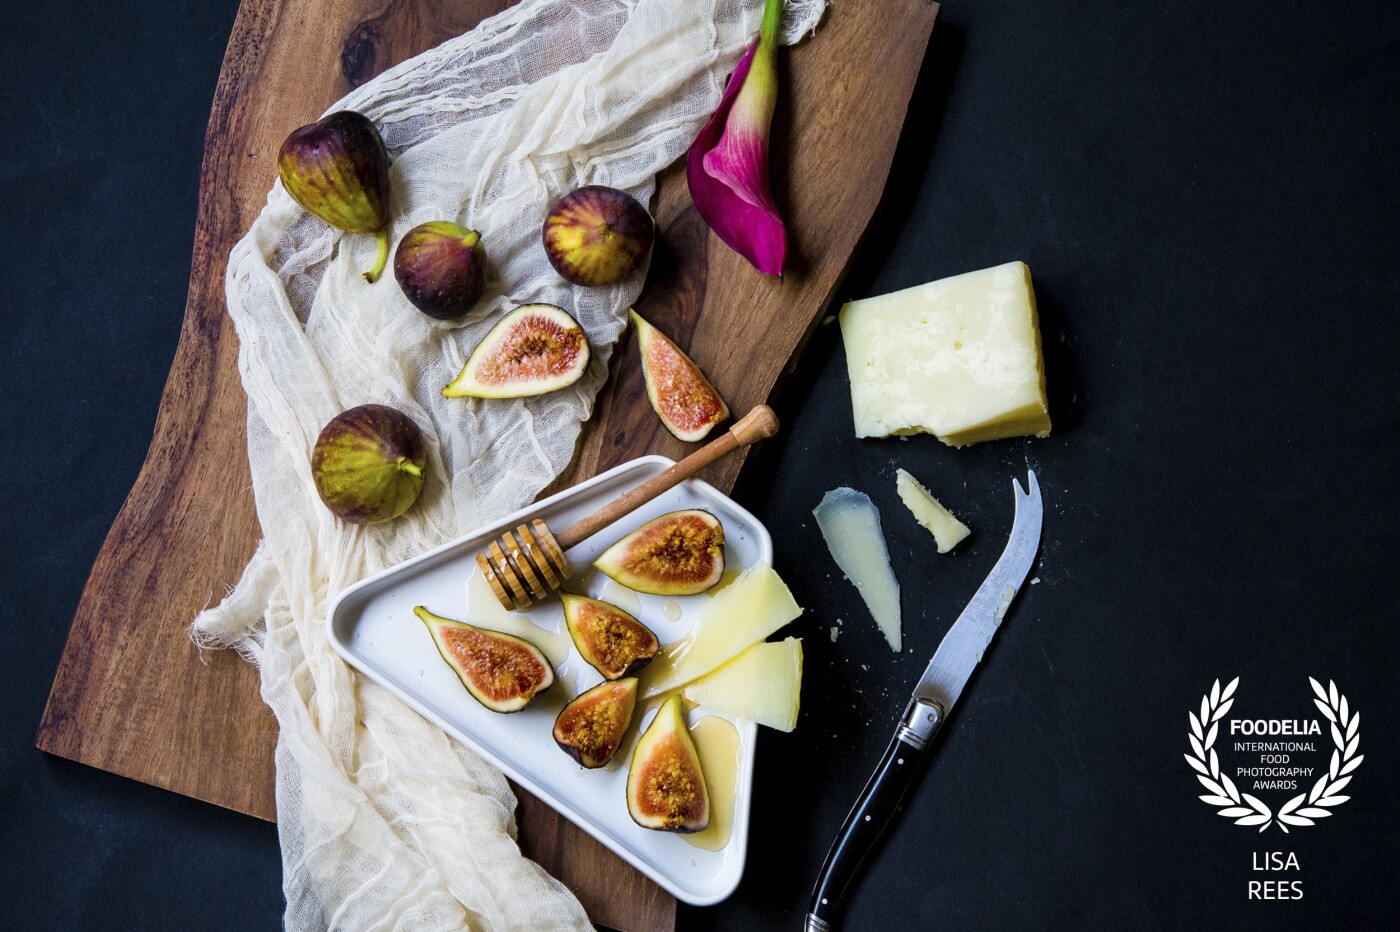 This image is a celebration of the gorgeous figs,  their sweetness is nicely balanced with Mitica Cordobes cheese and drizzles of honey.  I just love how colors, textures and tastes all come together in this shot.